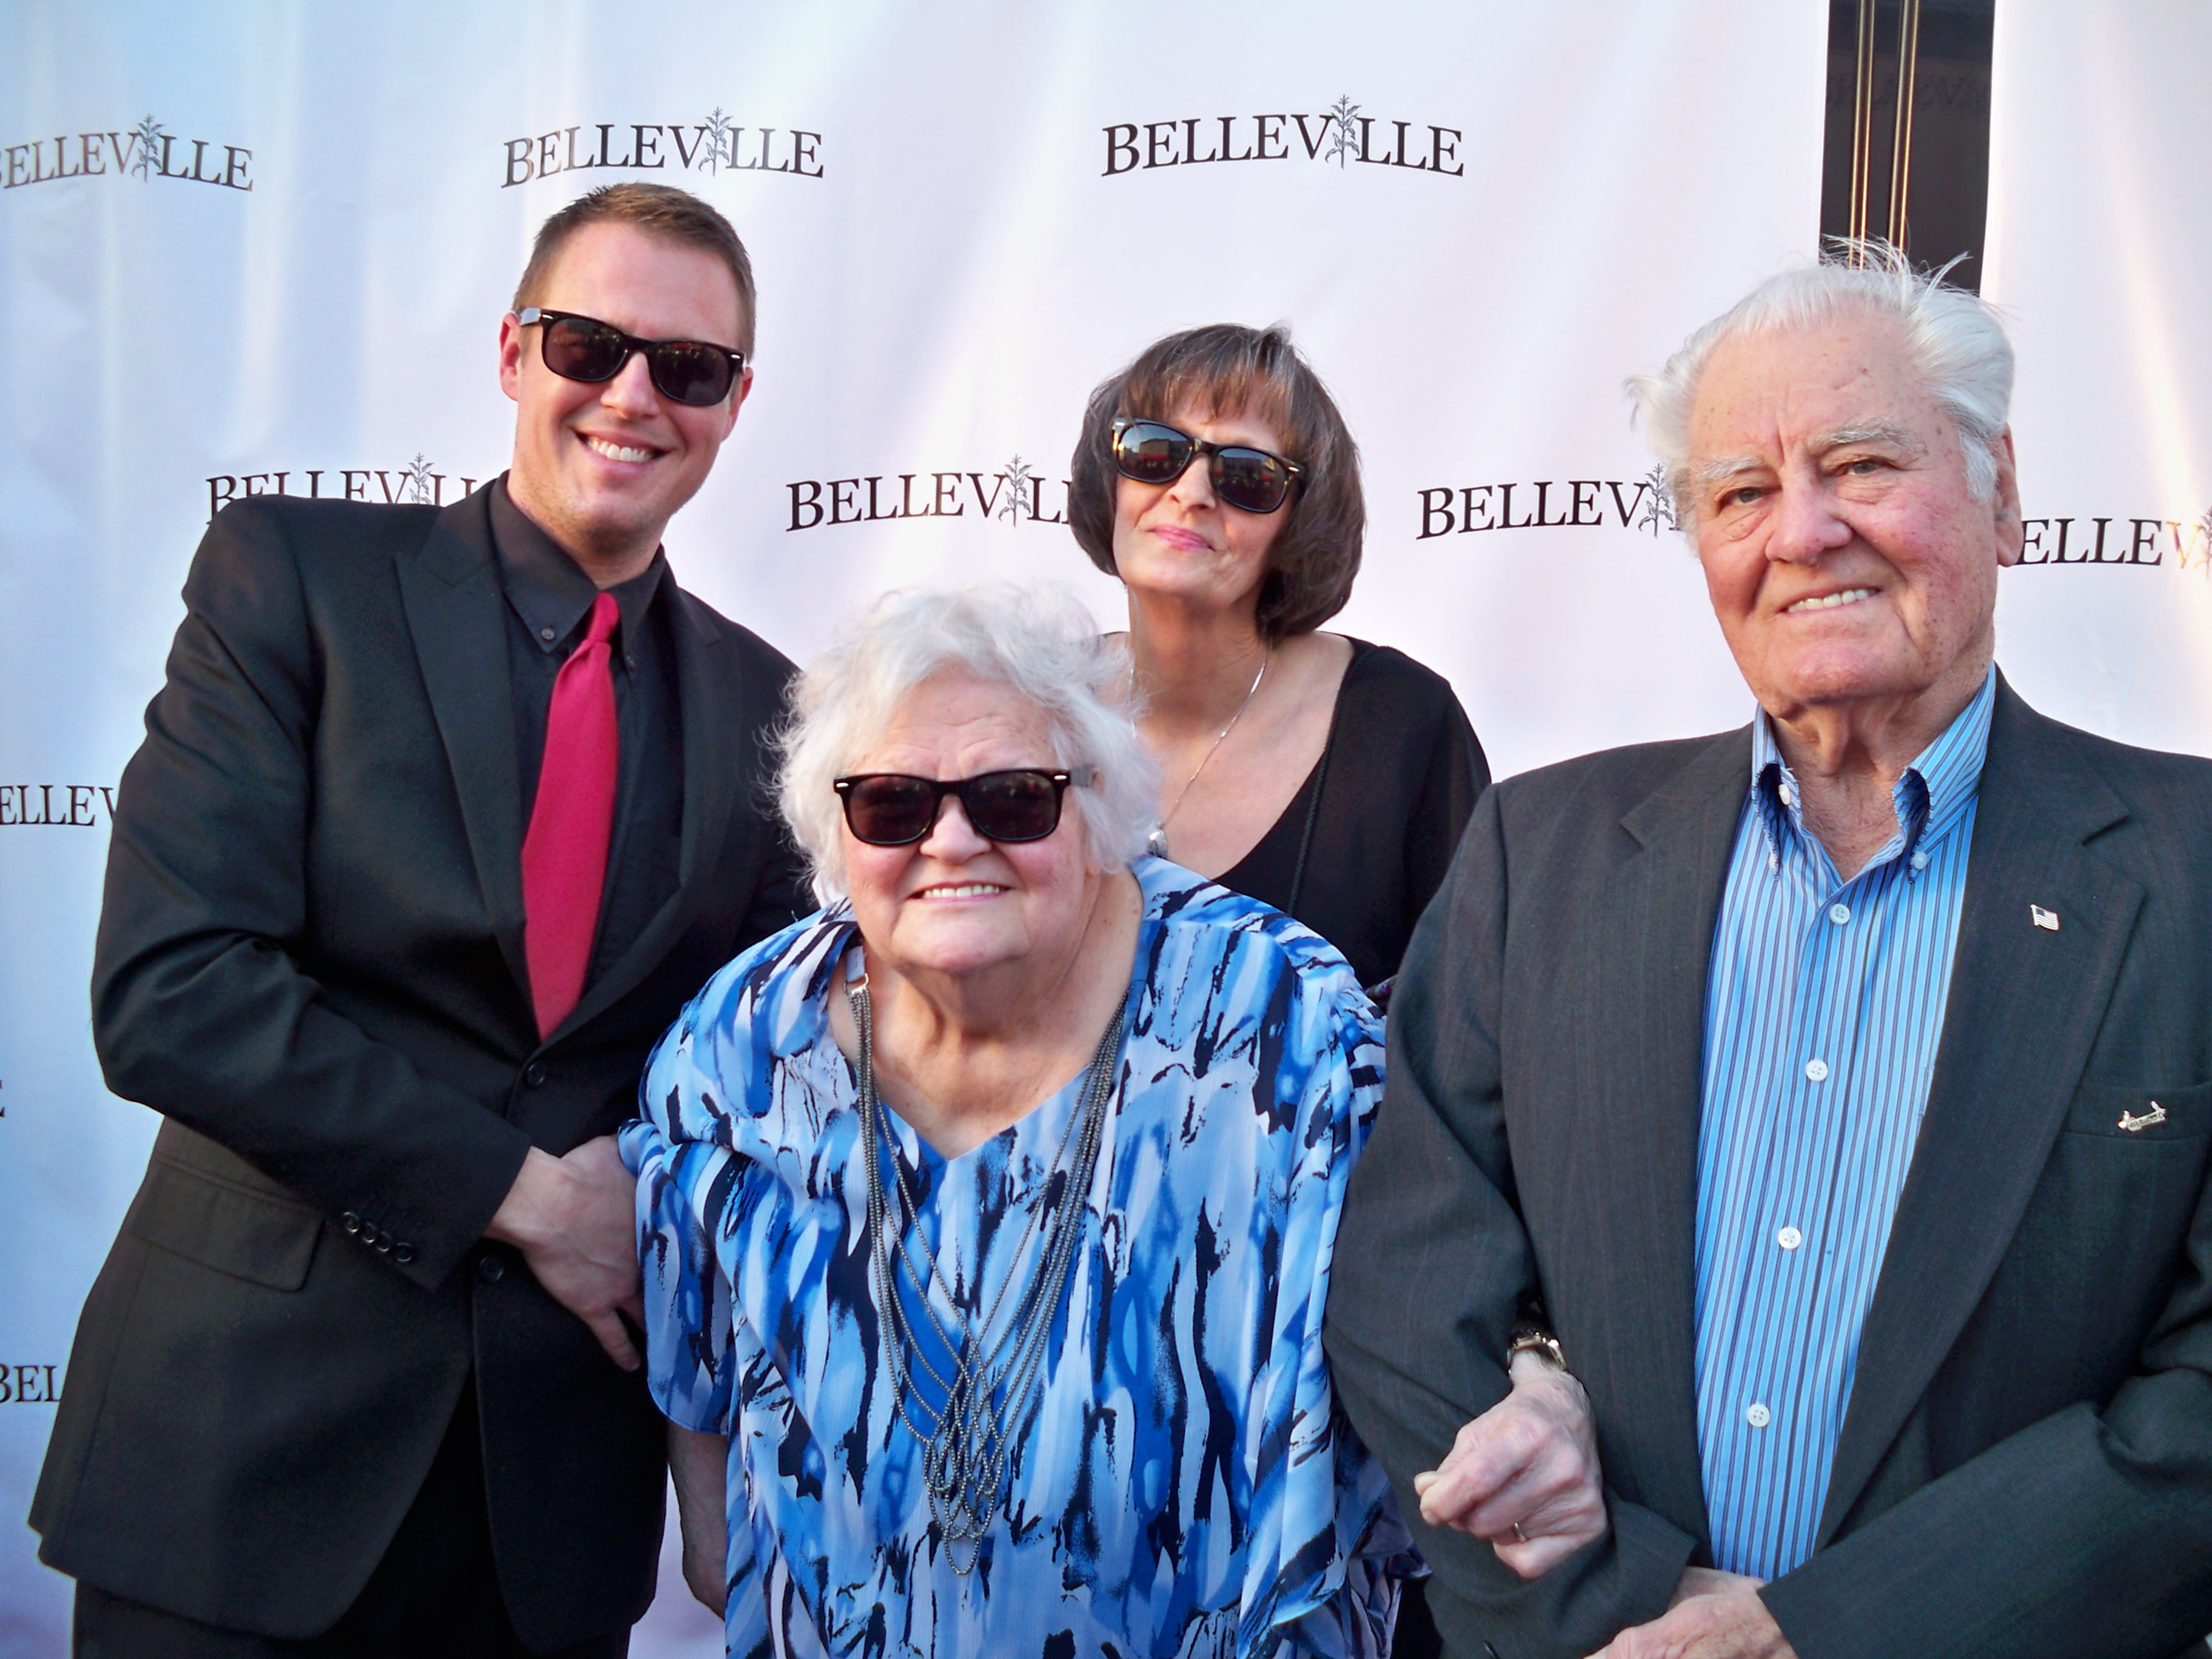 Walking the Red Carpet with my ma, grandma & grandpa @ the premiere of 